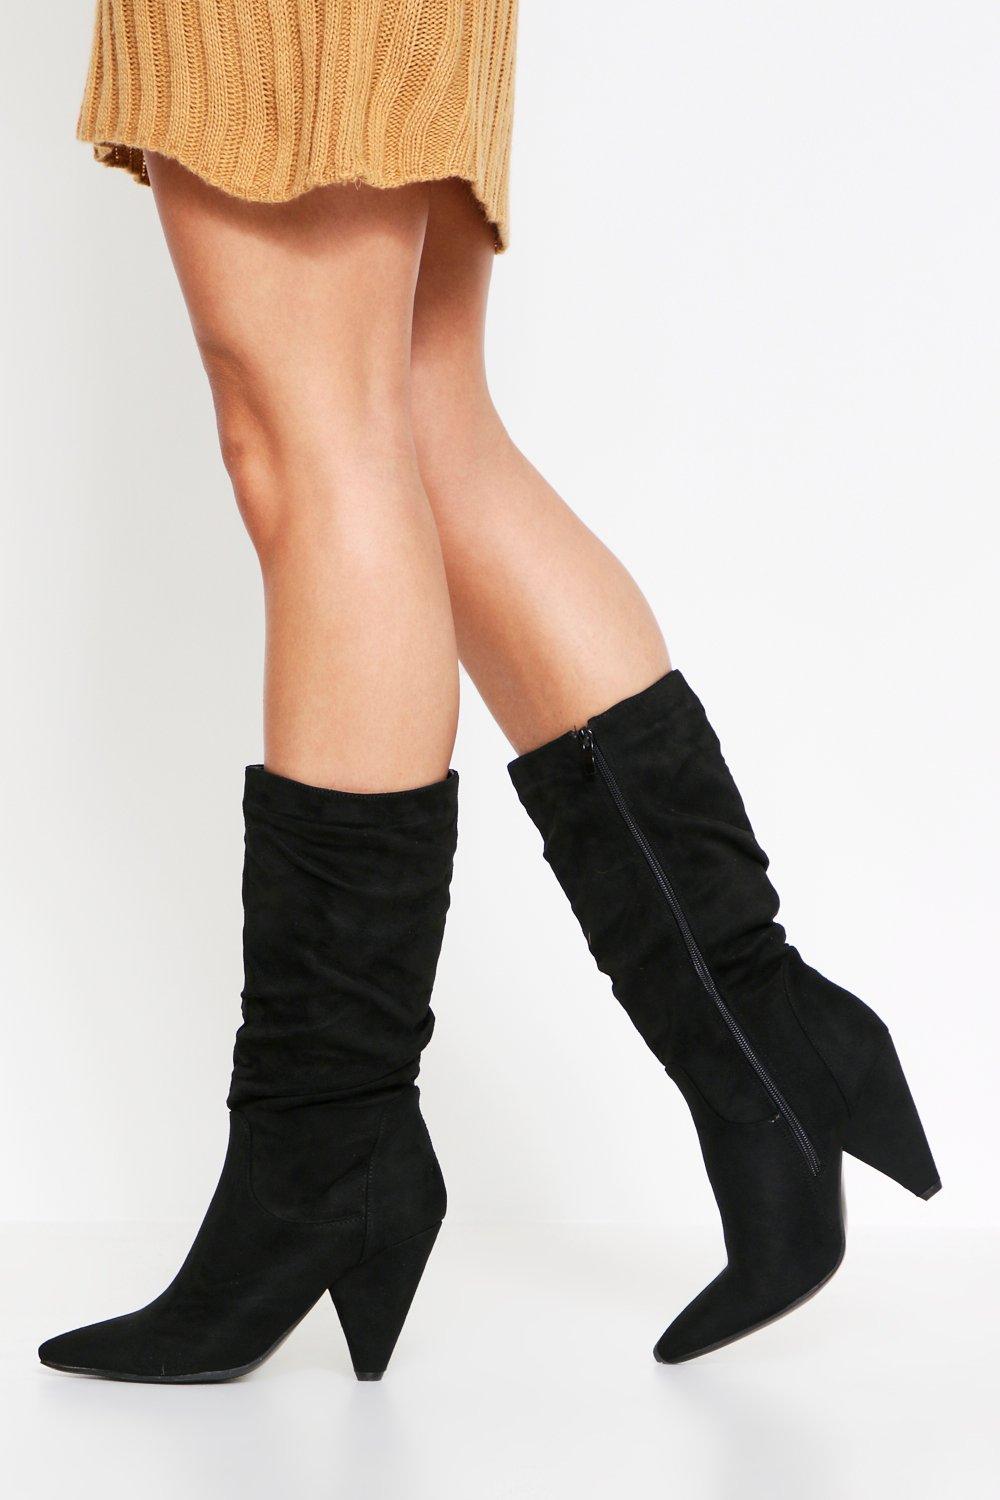 slouch calf boots uk